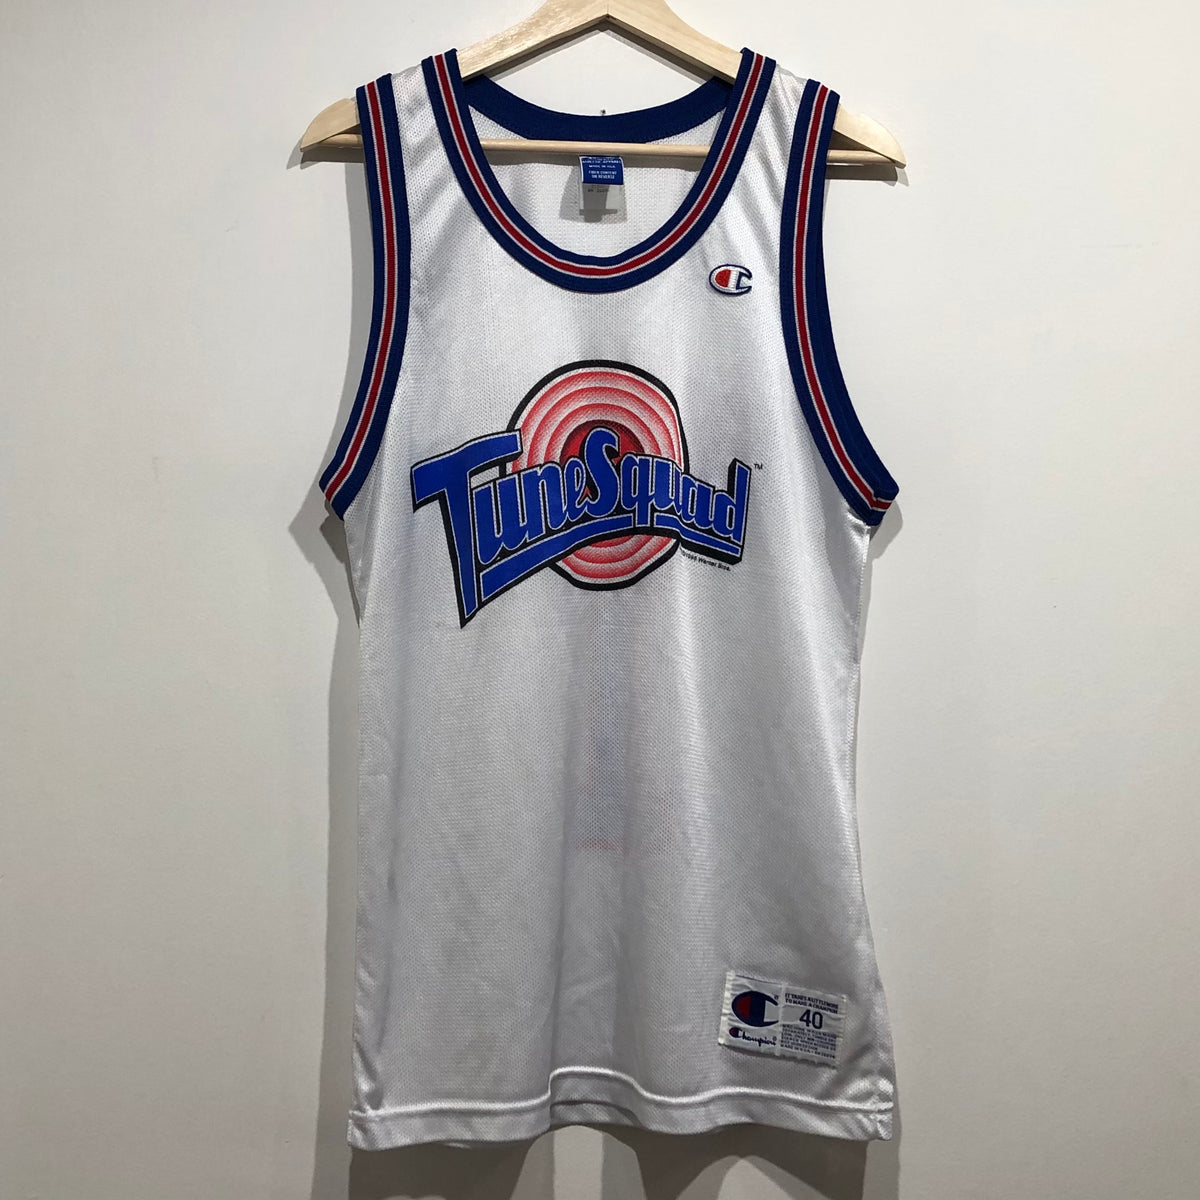 1996 Bugs Bunny Tune Squad Space Jam Champion Jersey Size 48